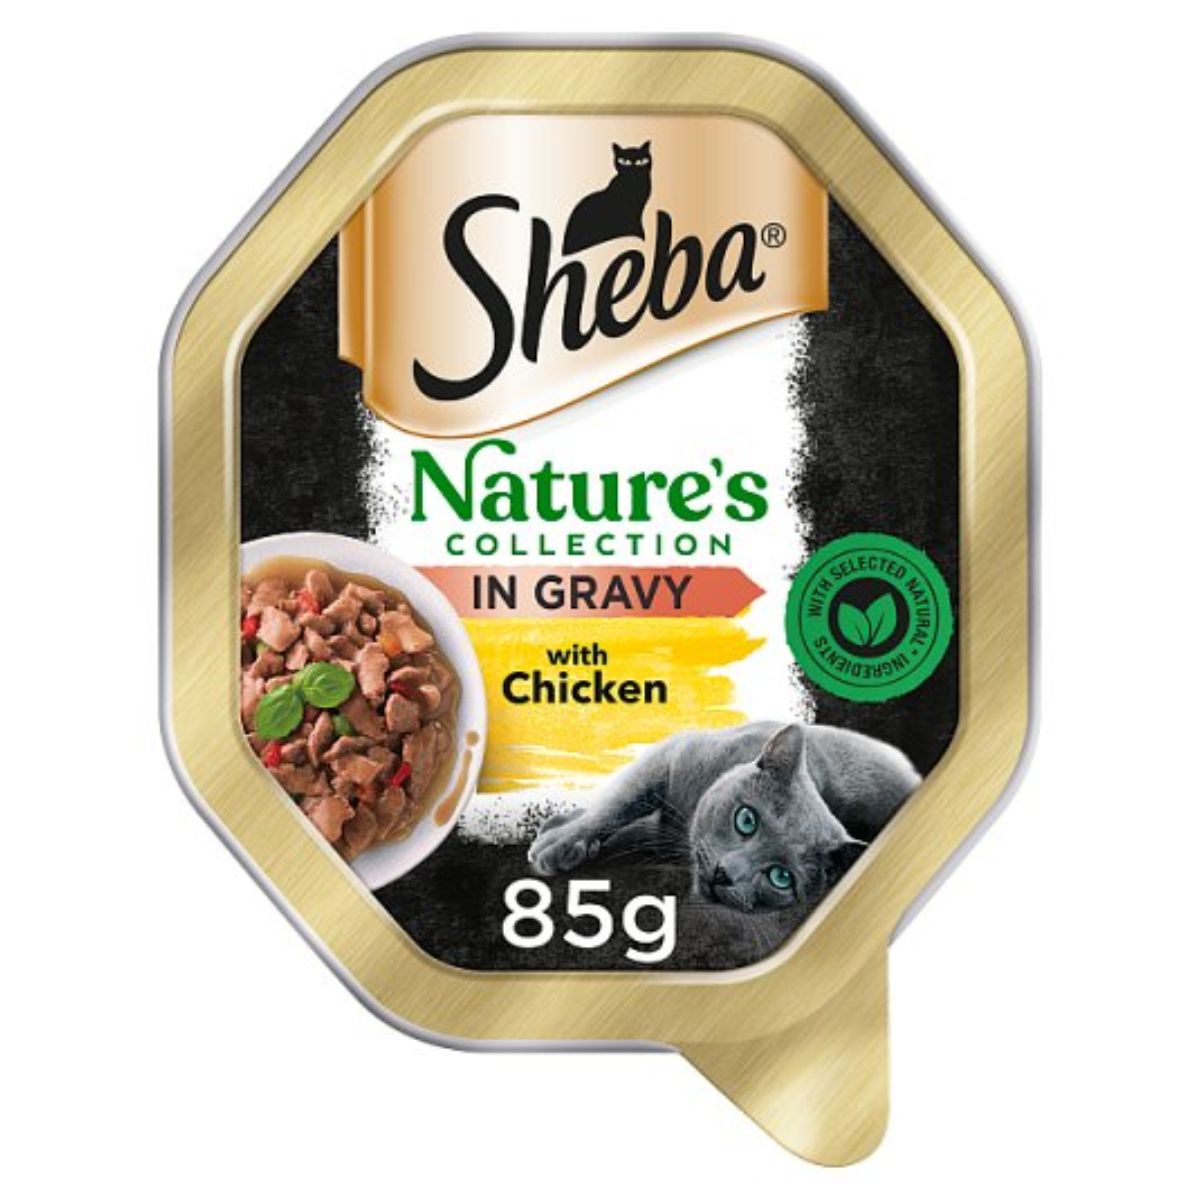 Sheba - Nature Collection in Gravy with Chicken Garnished with Red Pepper - 85g cat food.